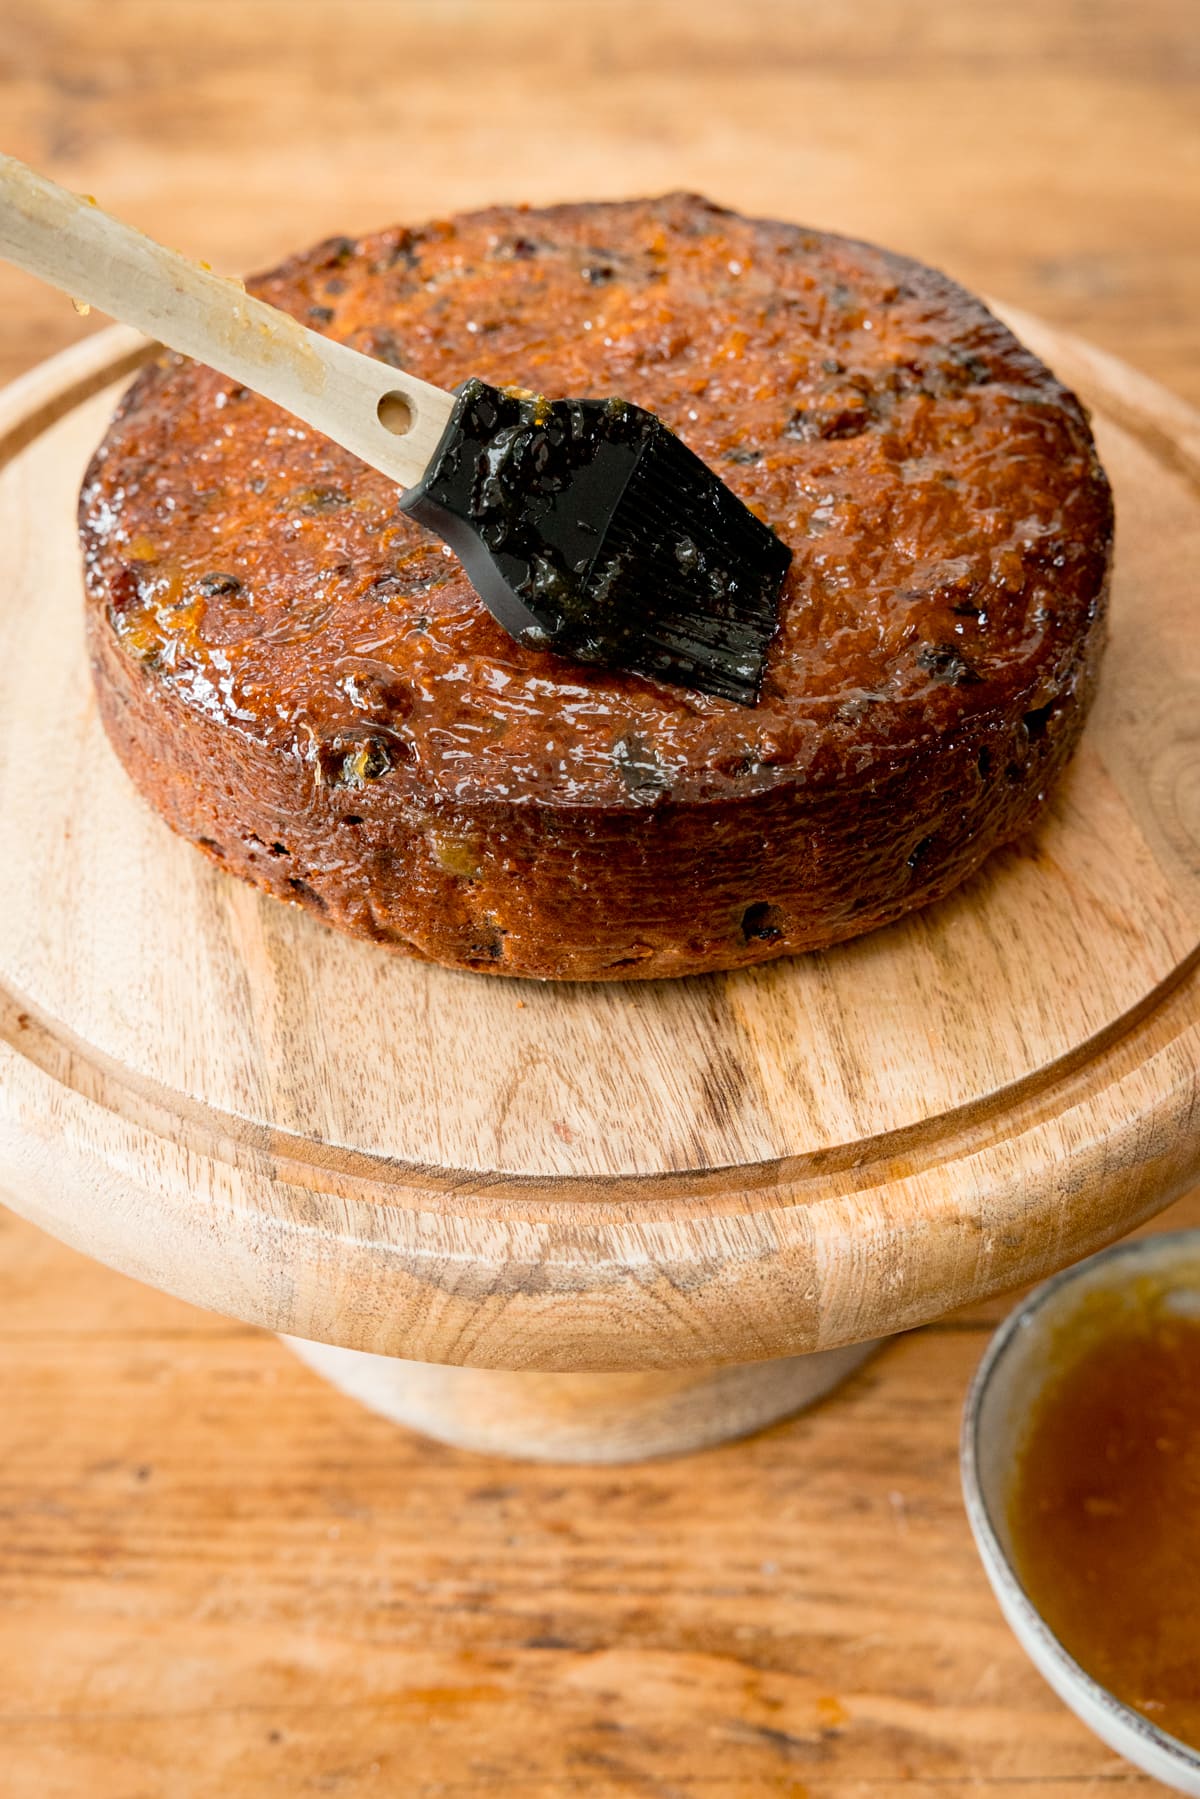 A fruitcake on a wooden cake stand, on a wooden table. The cake is being brushed with Apricot jam.